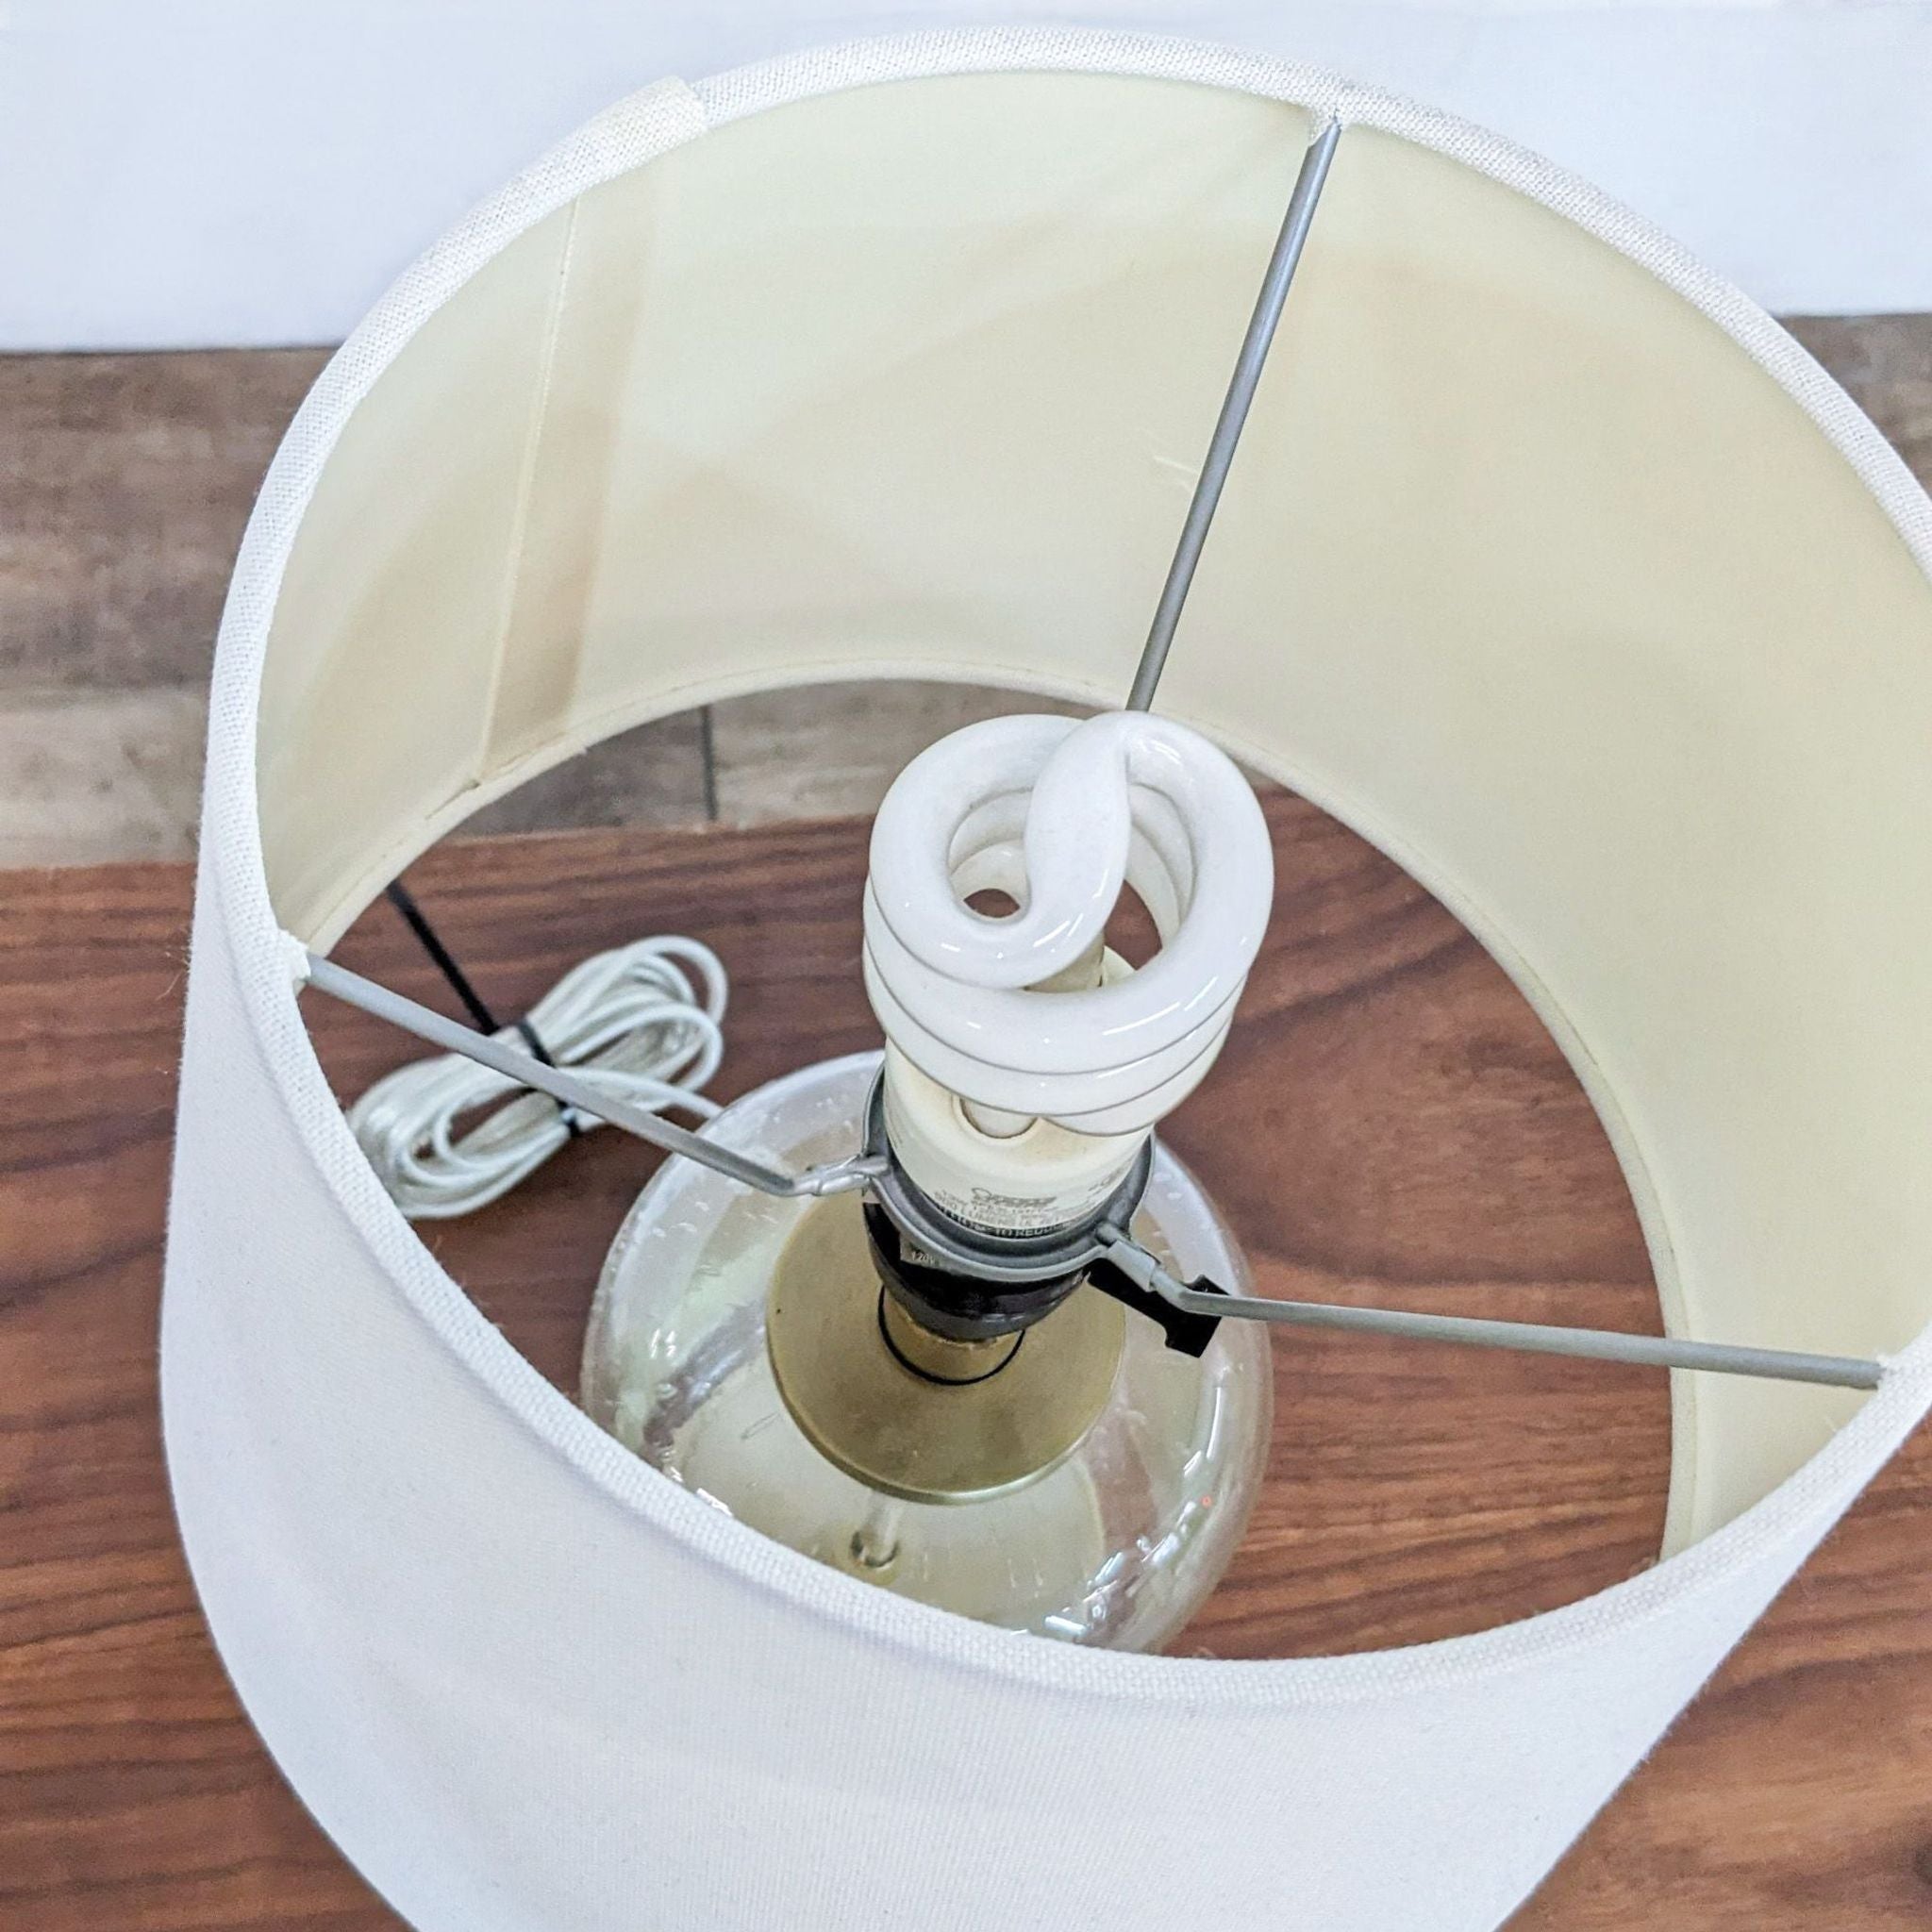 Top view of a Reperch lamp showing an energy-saving bulb and white fabric lampshade interior.